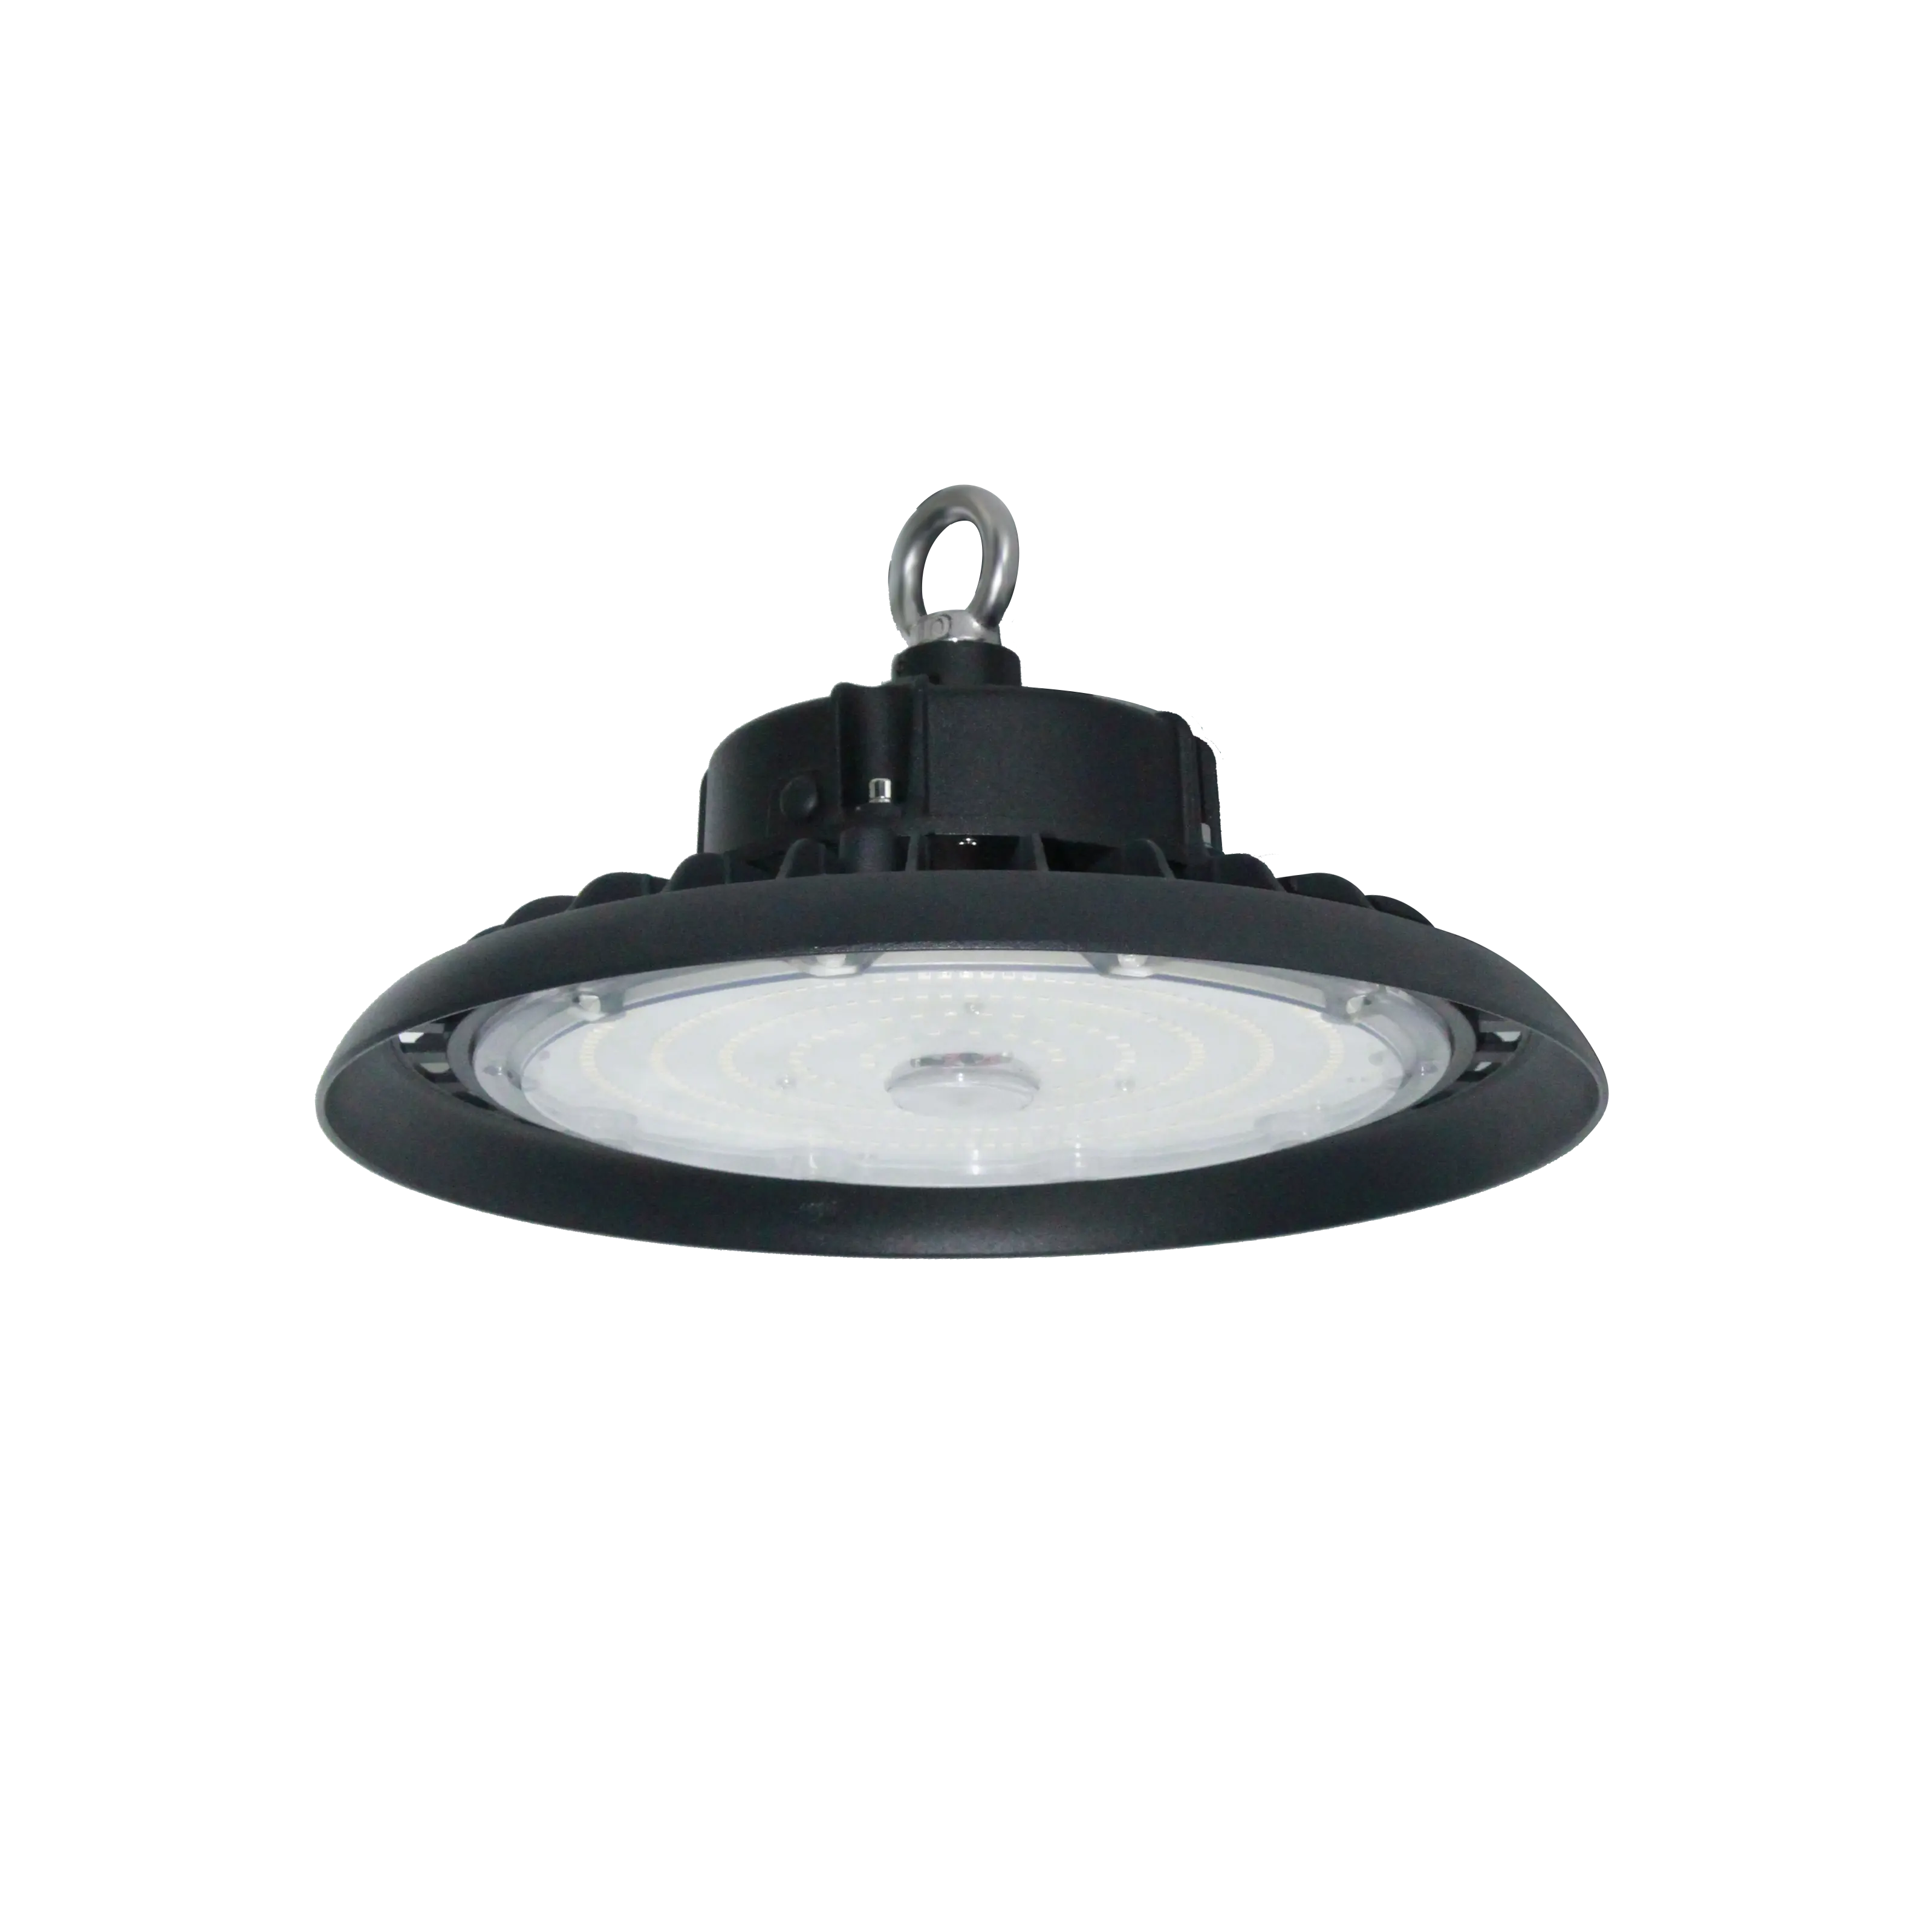 Warehouse Lighting LED Canopy Light 5 Years Warranty Graphene 1-10V Dimmable 150LM/W 150W LED Industrial Lights